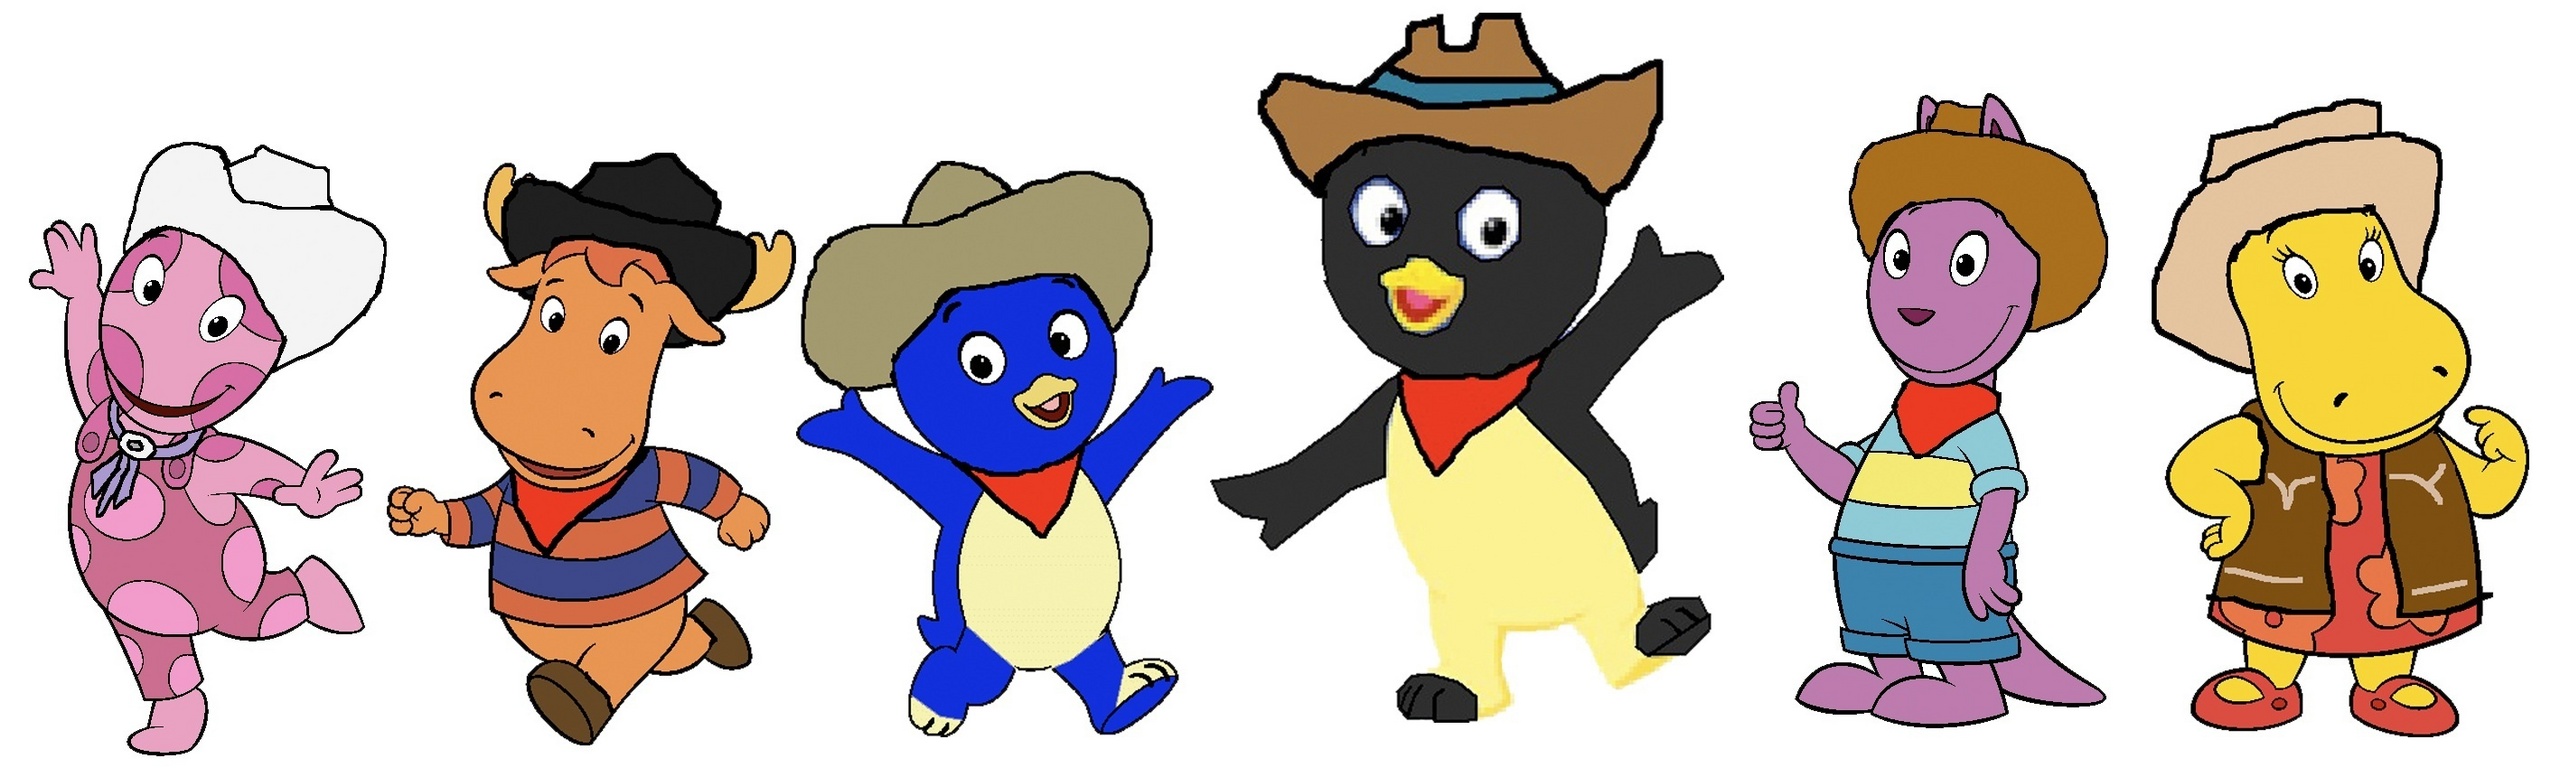 The Backyardigans Image Cowboys And Cowgirls HD Wallpaper